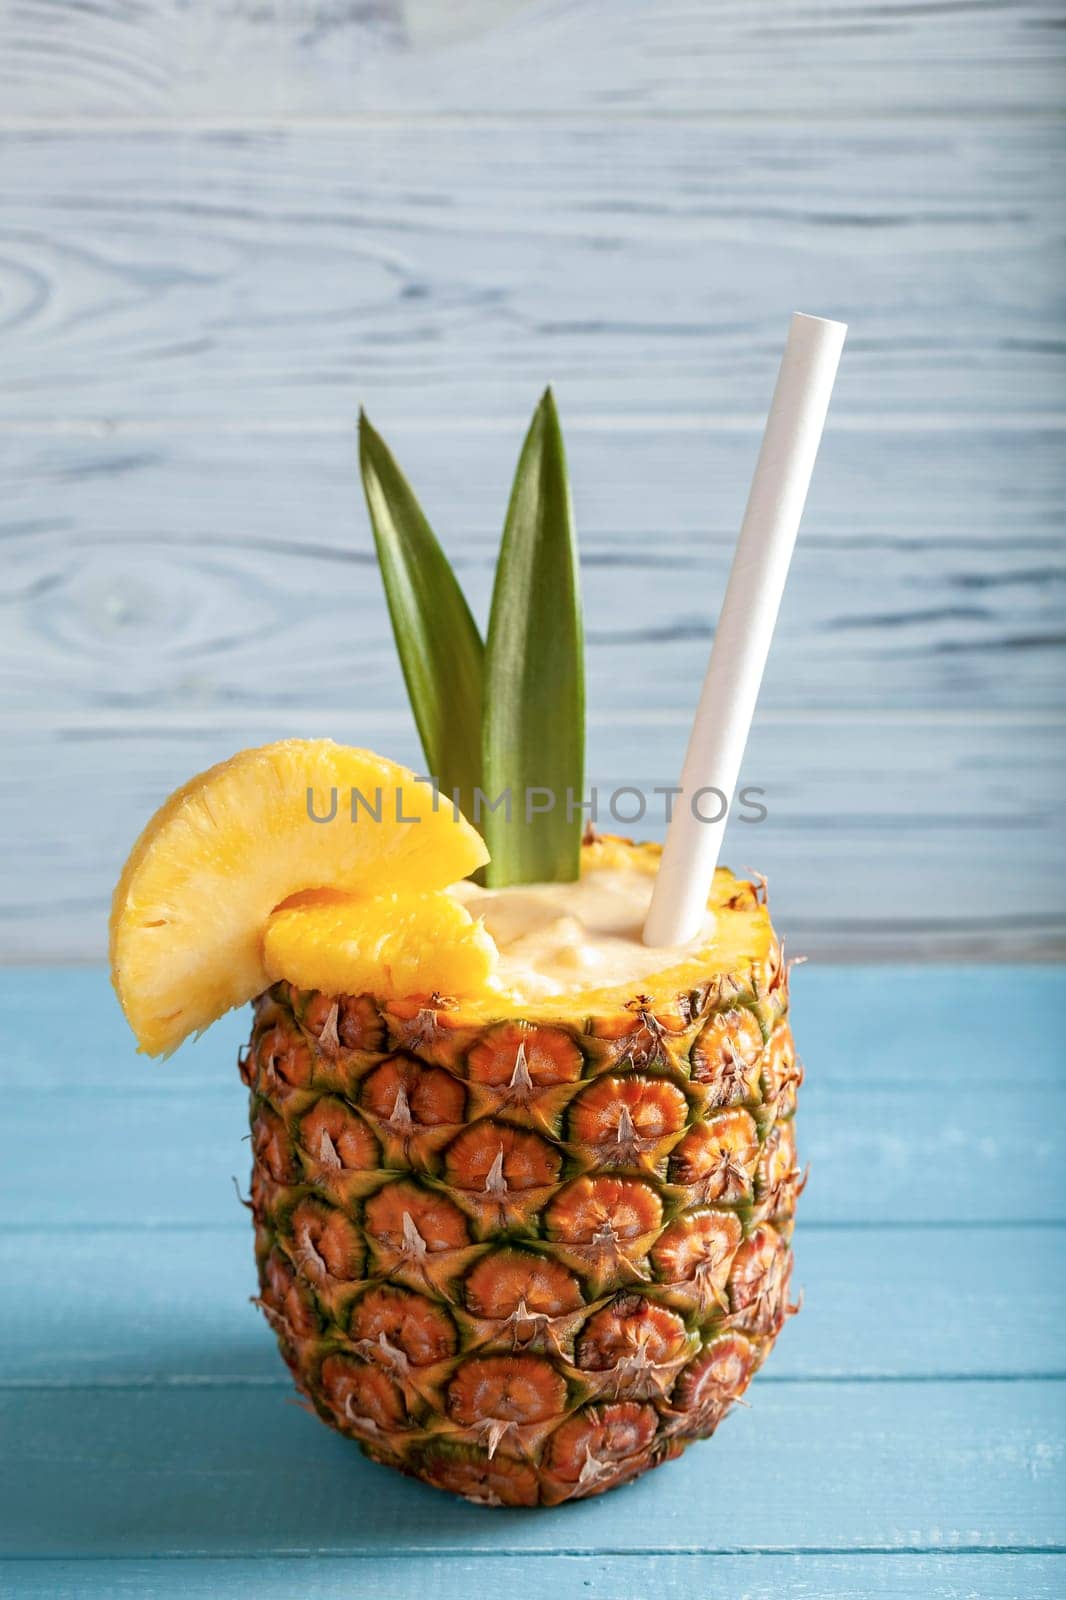 Refreshing Pina Colada Cocktail in Pineapple by gcm